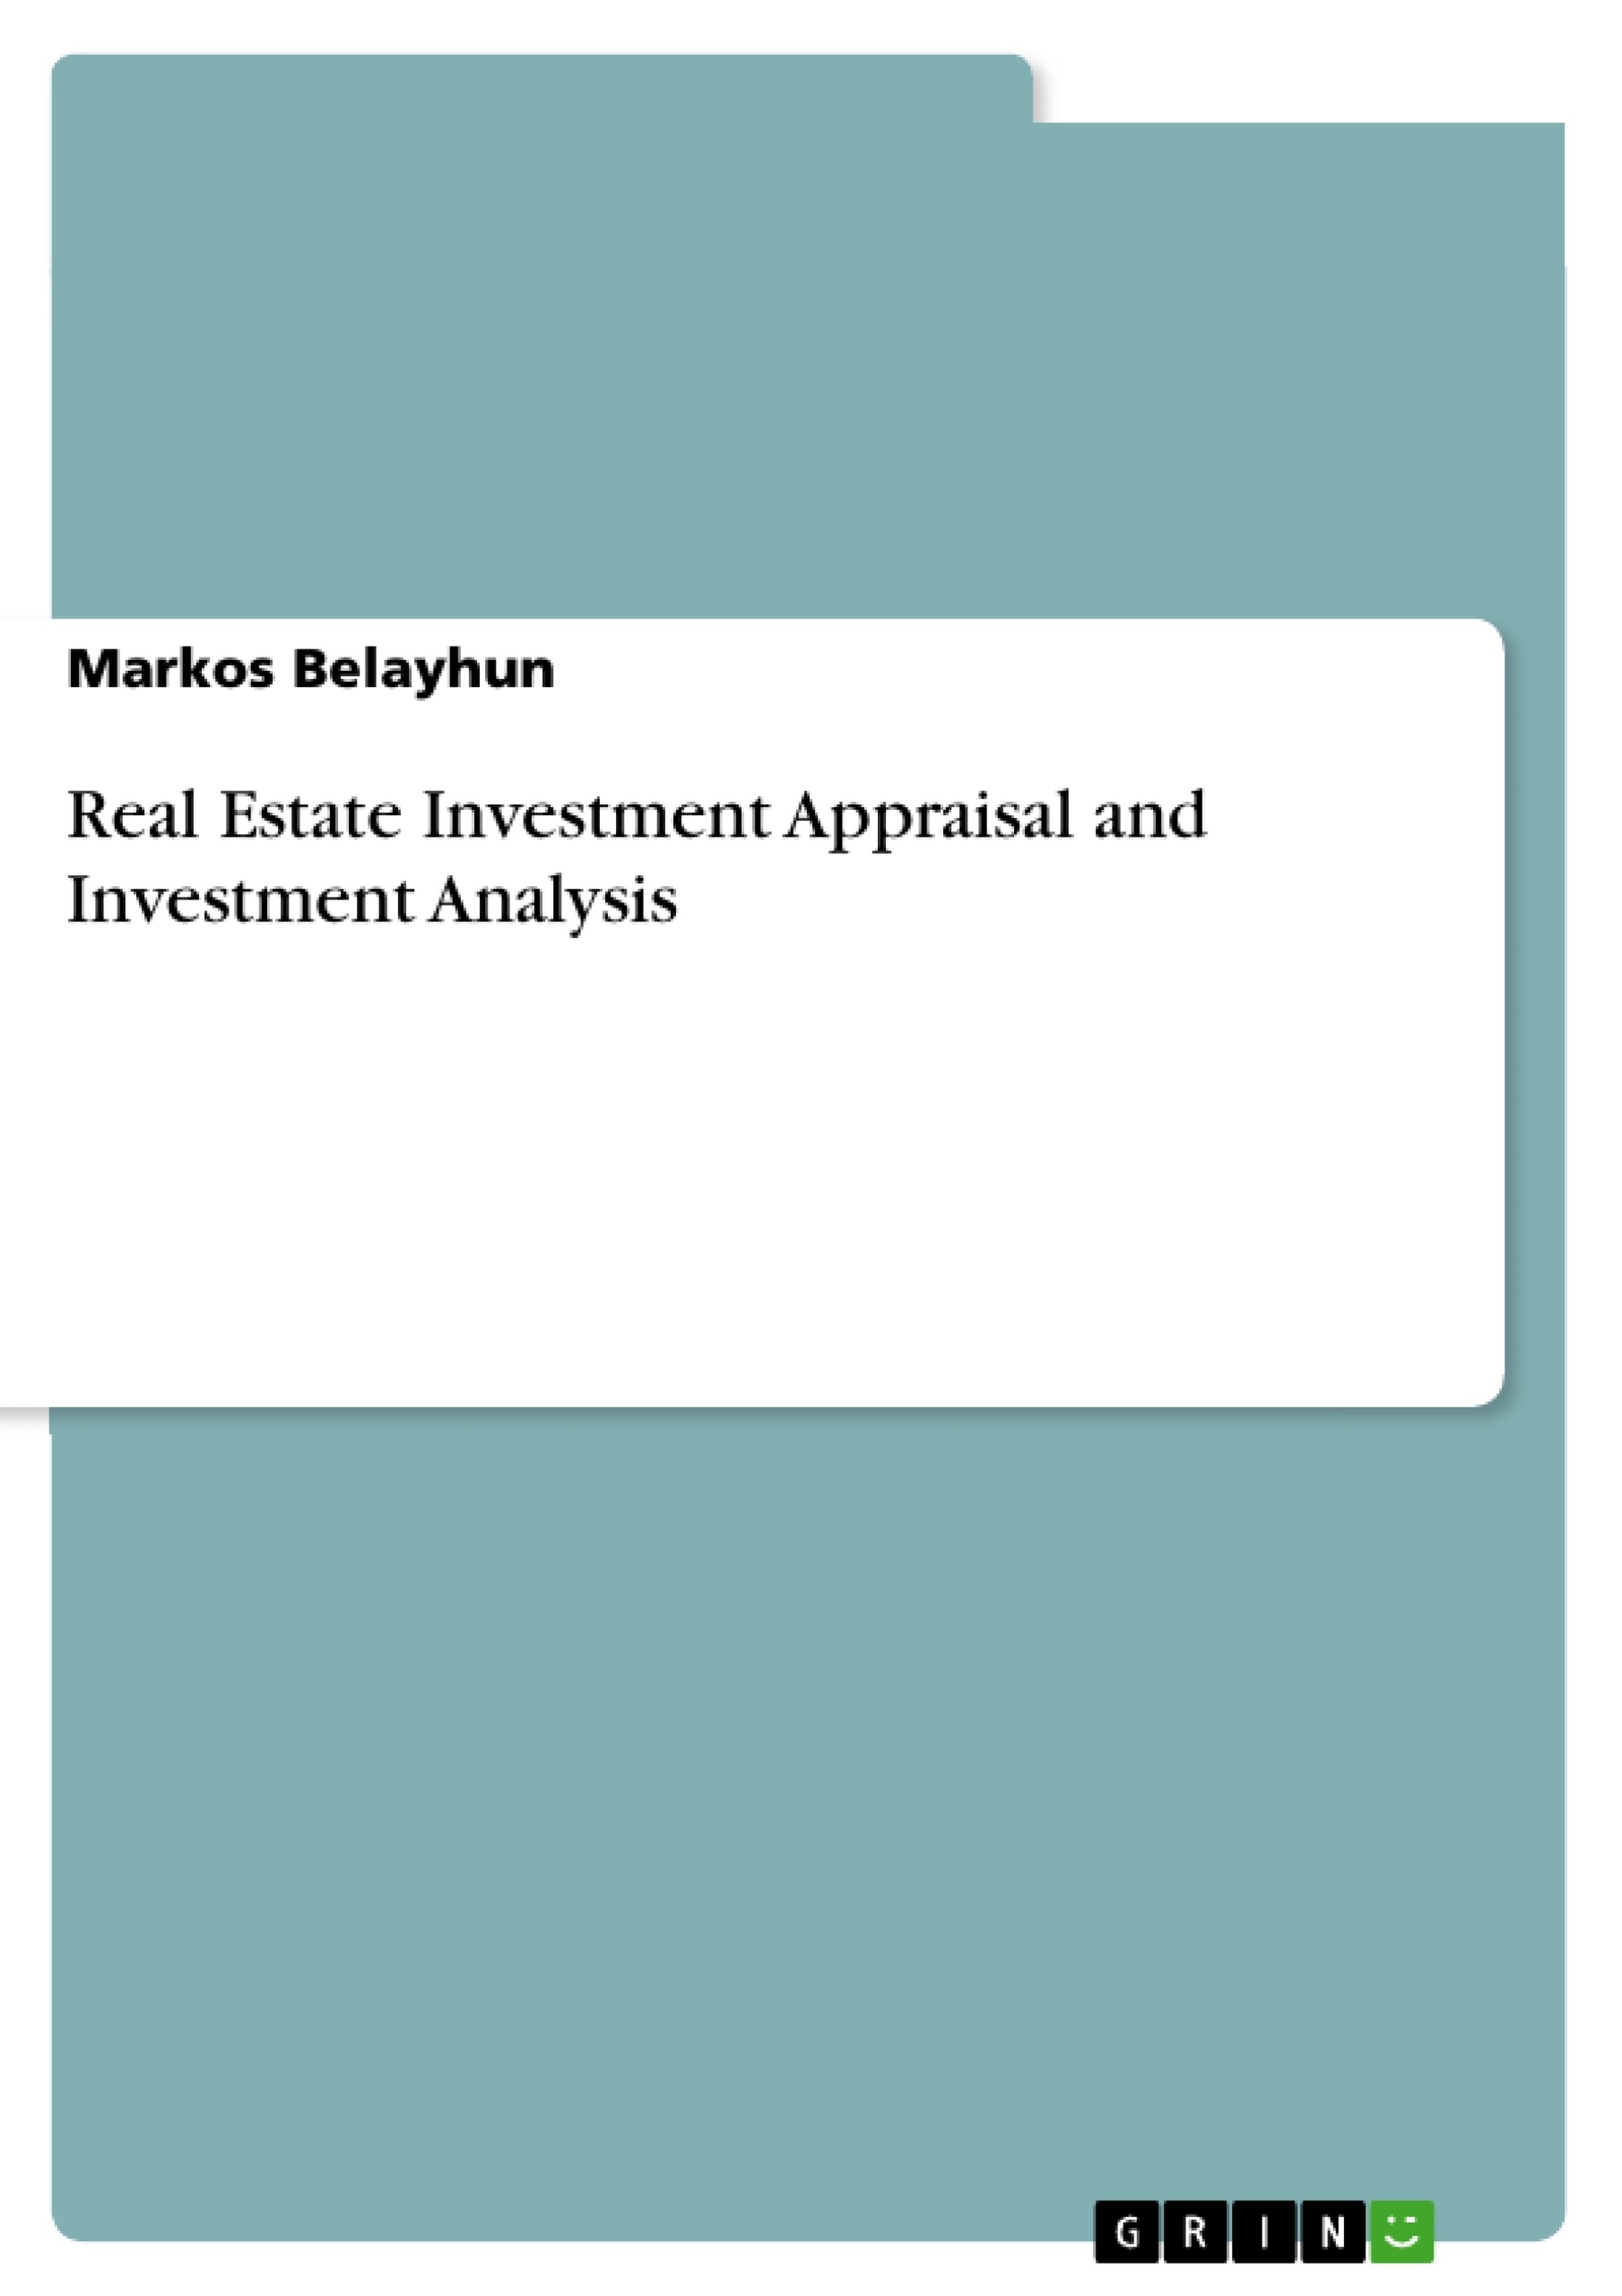 Title: Real Estate Investment Appraisal and Investment Analysis